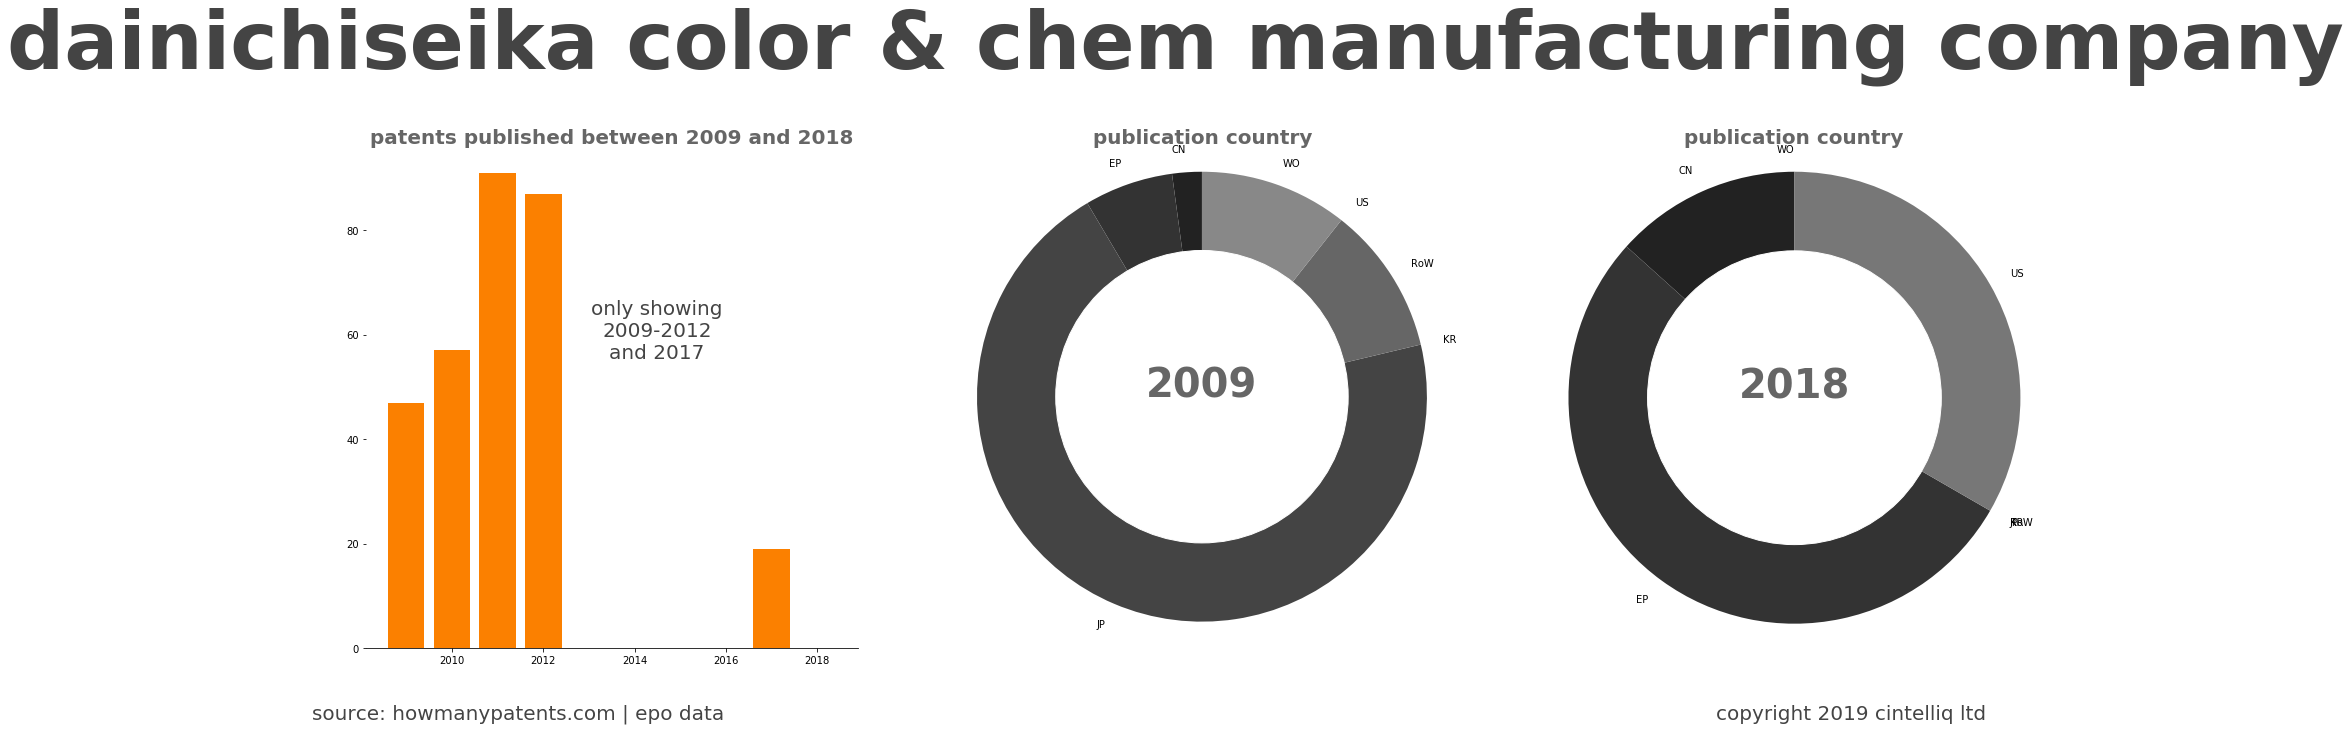 summary of patents for Dainichiseika Color & Chem Manufacturing Company